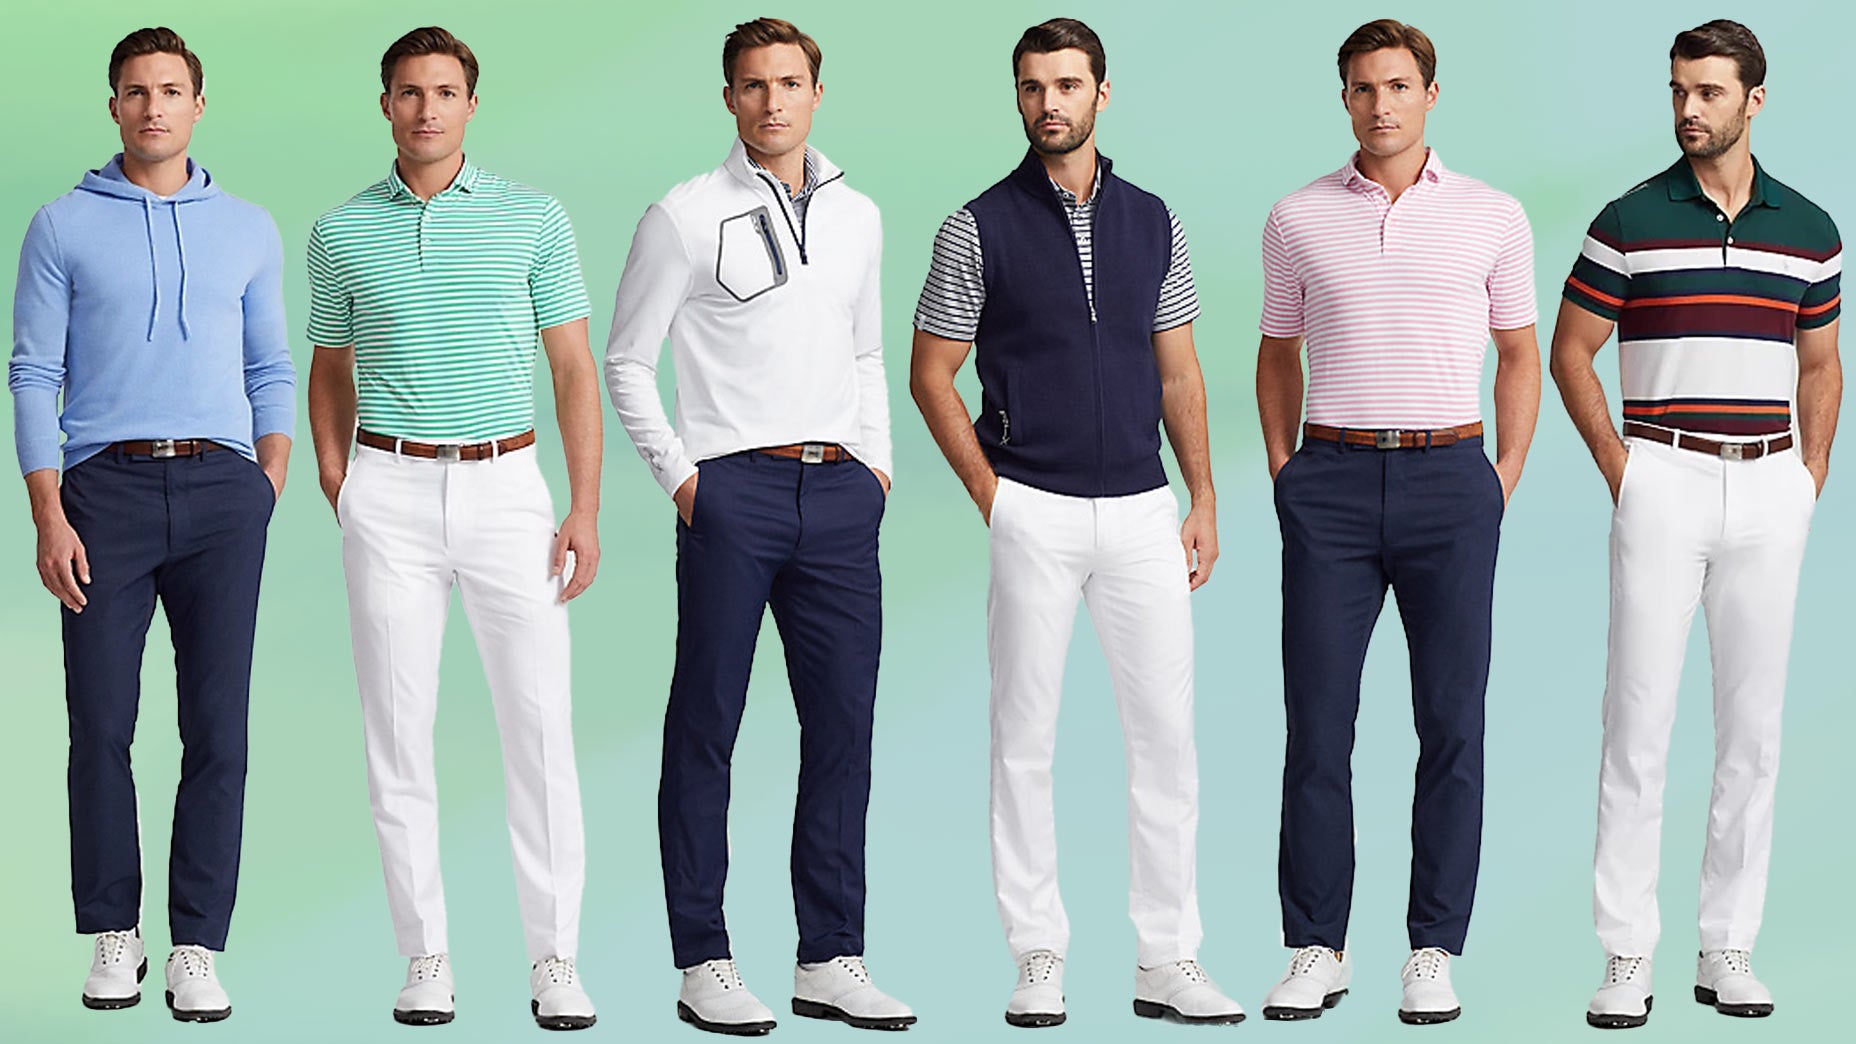 Golf vacation coming up? Gear up with our Polo RLX Golf favorites